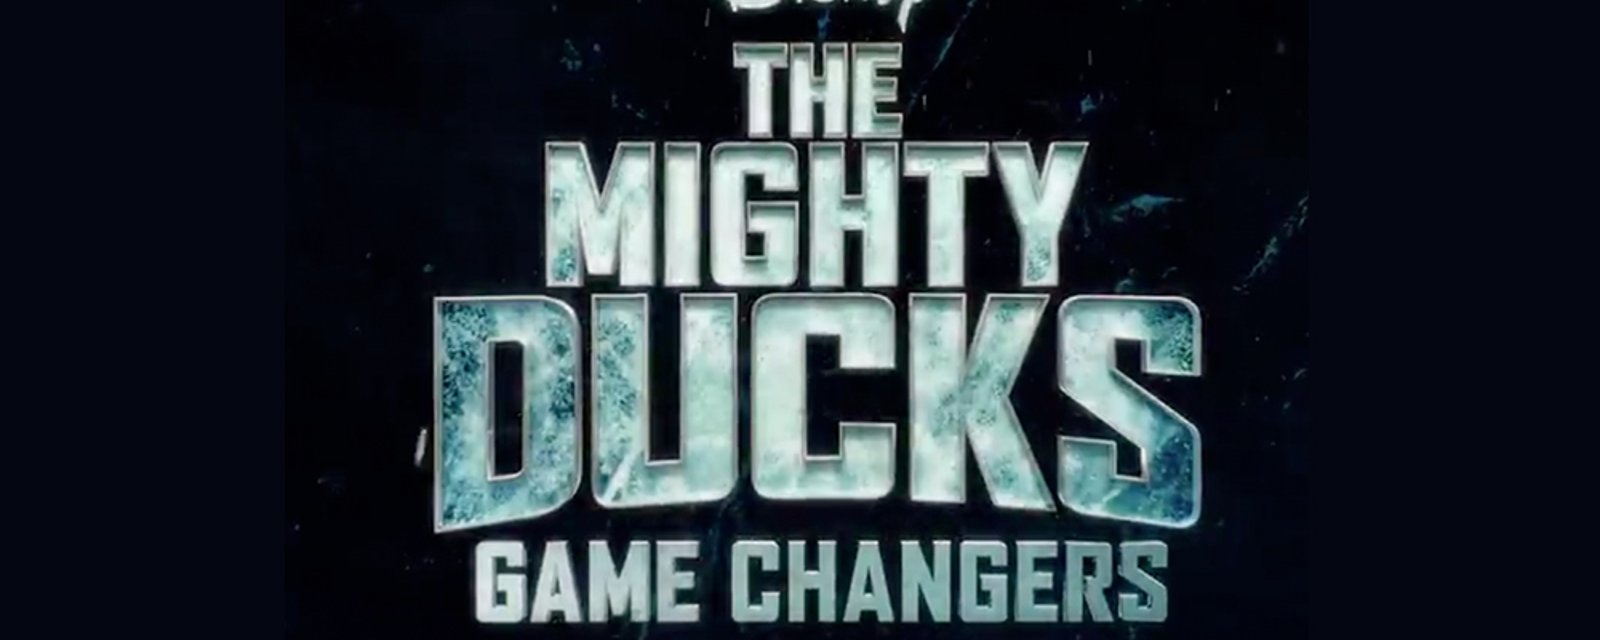 The Mighty Ducks are back! Disney releases official trailer for new series